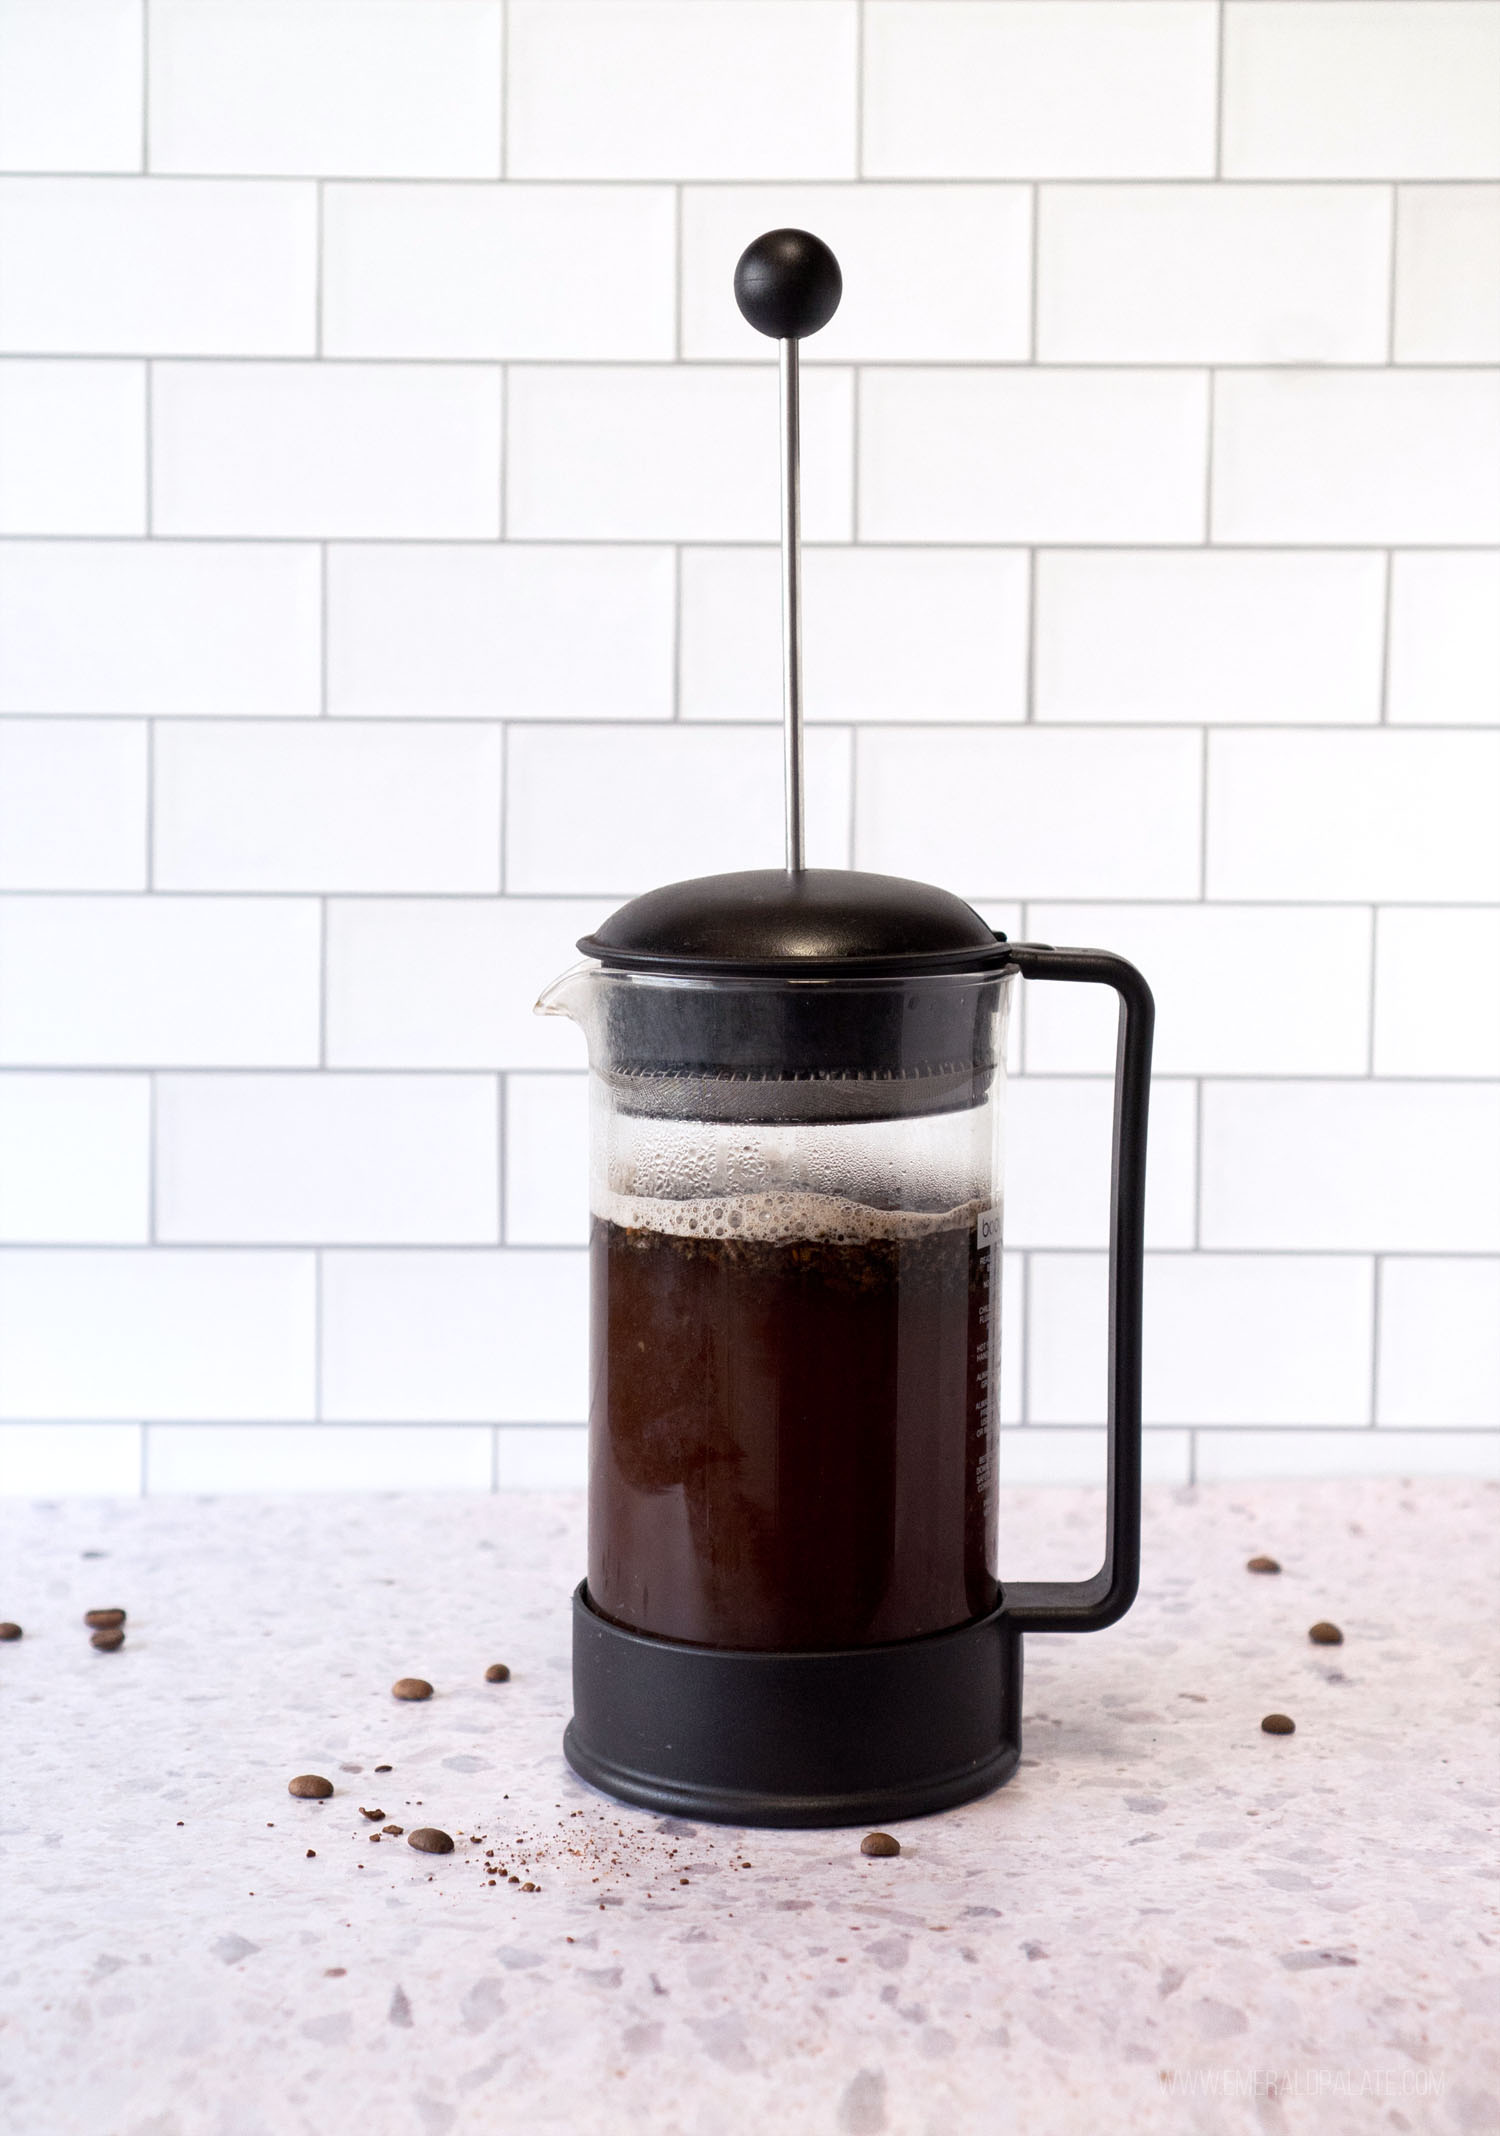 Chemex vs French Press: The Pros and Cons of Each Coffee Making Method